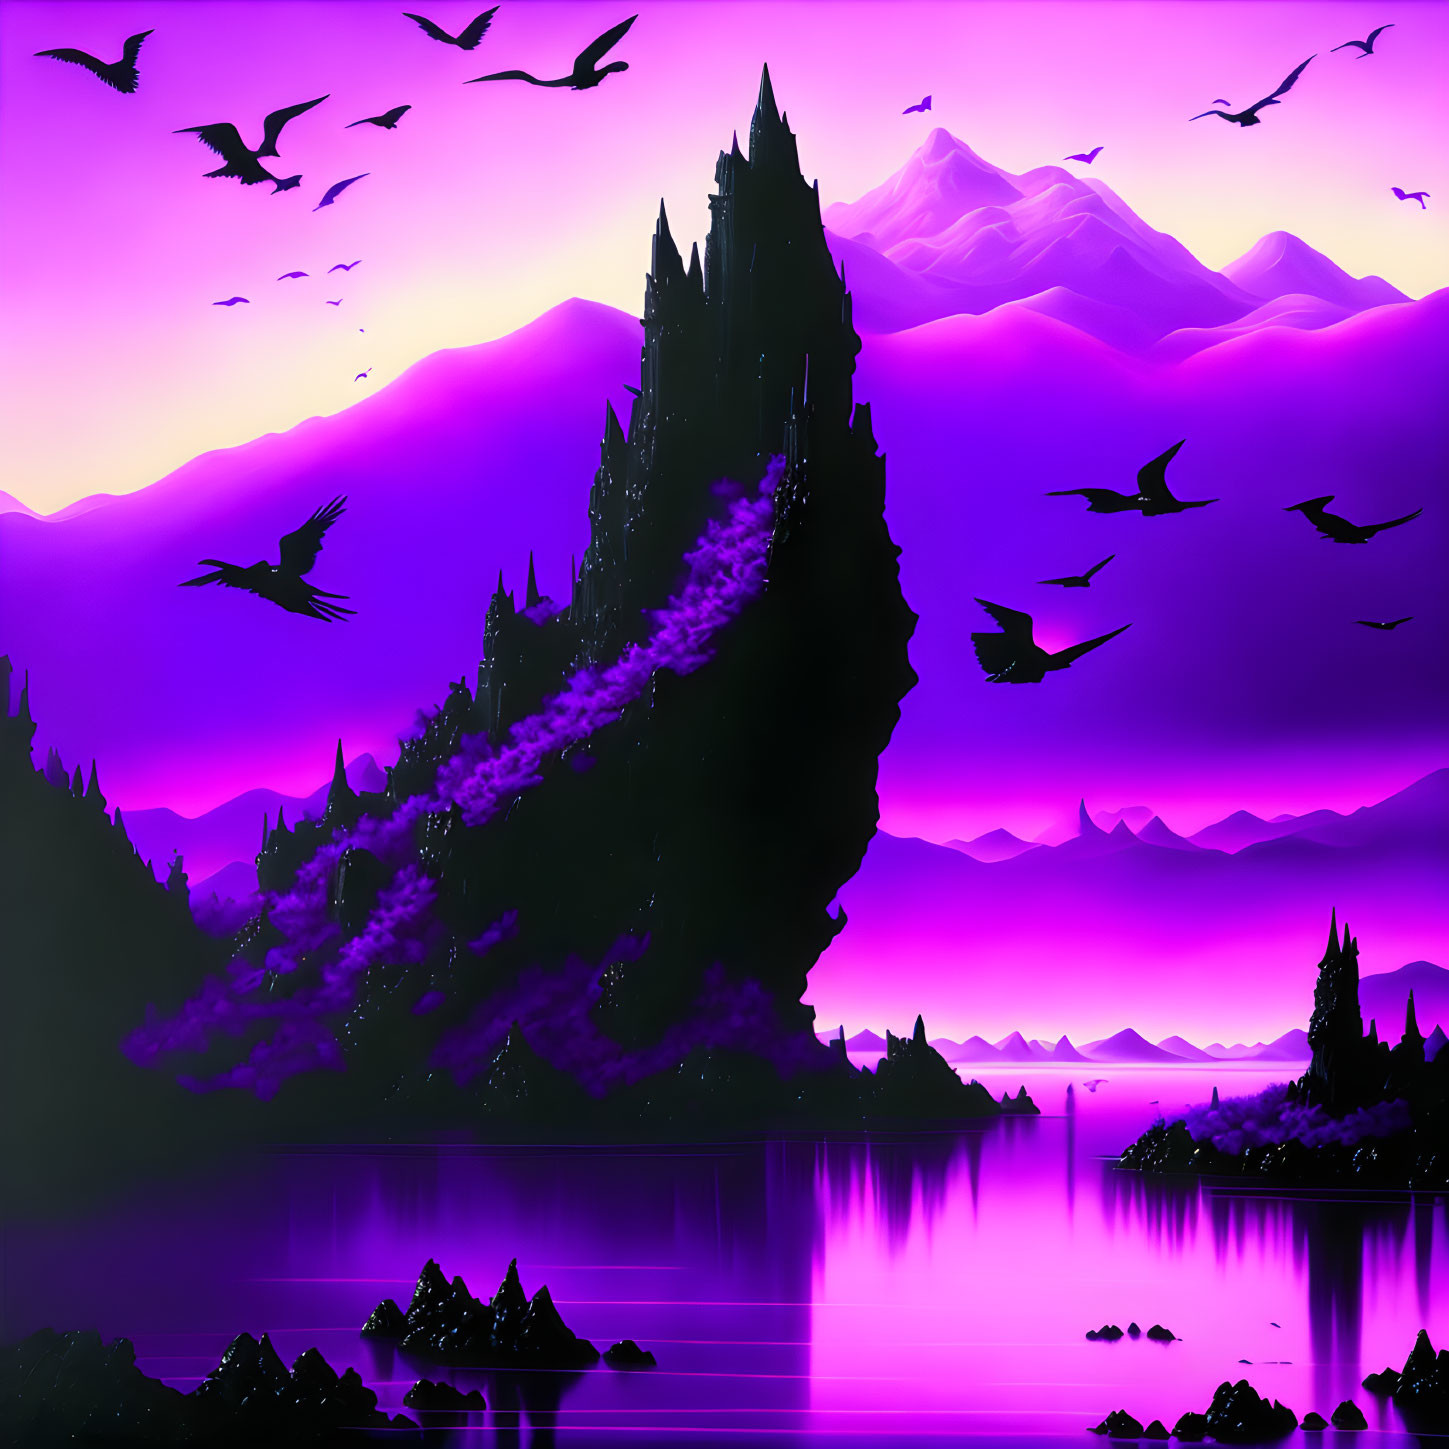 Purple Fantasy Landscape with Spire-like Mountain and Silhouetted Birds